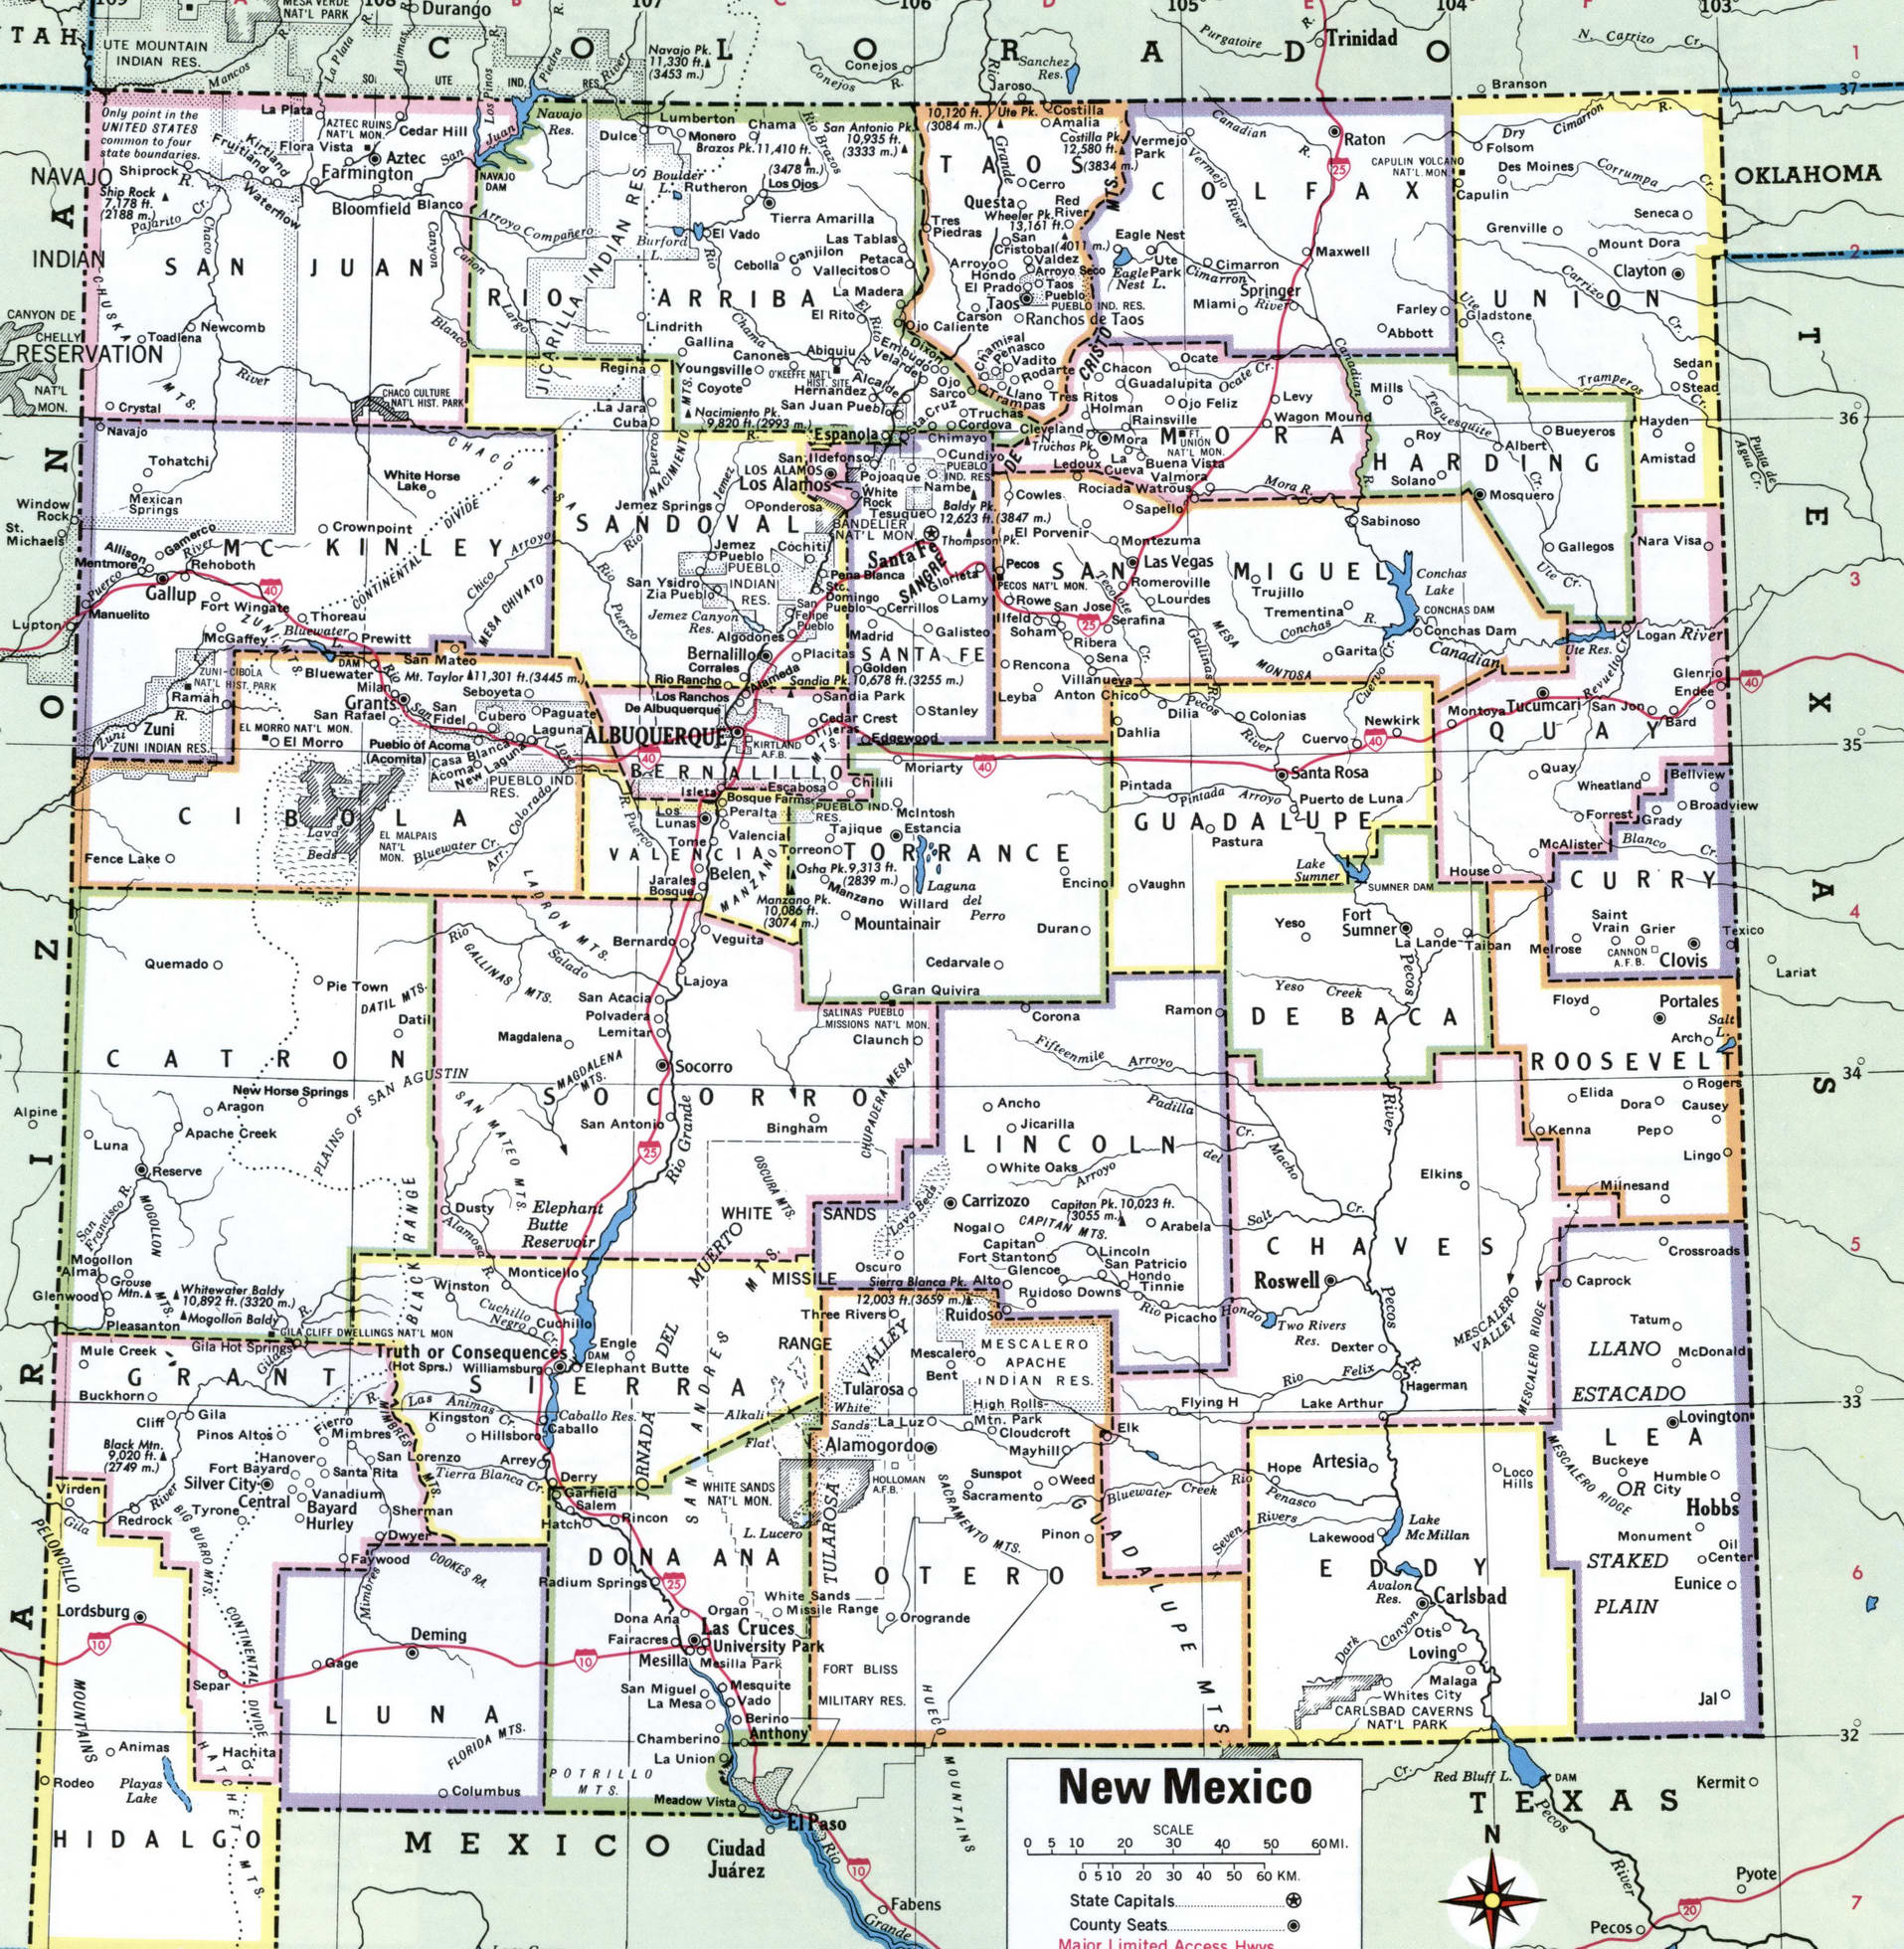 New Mexico map with counties